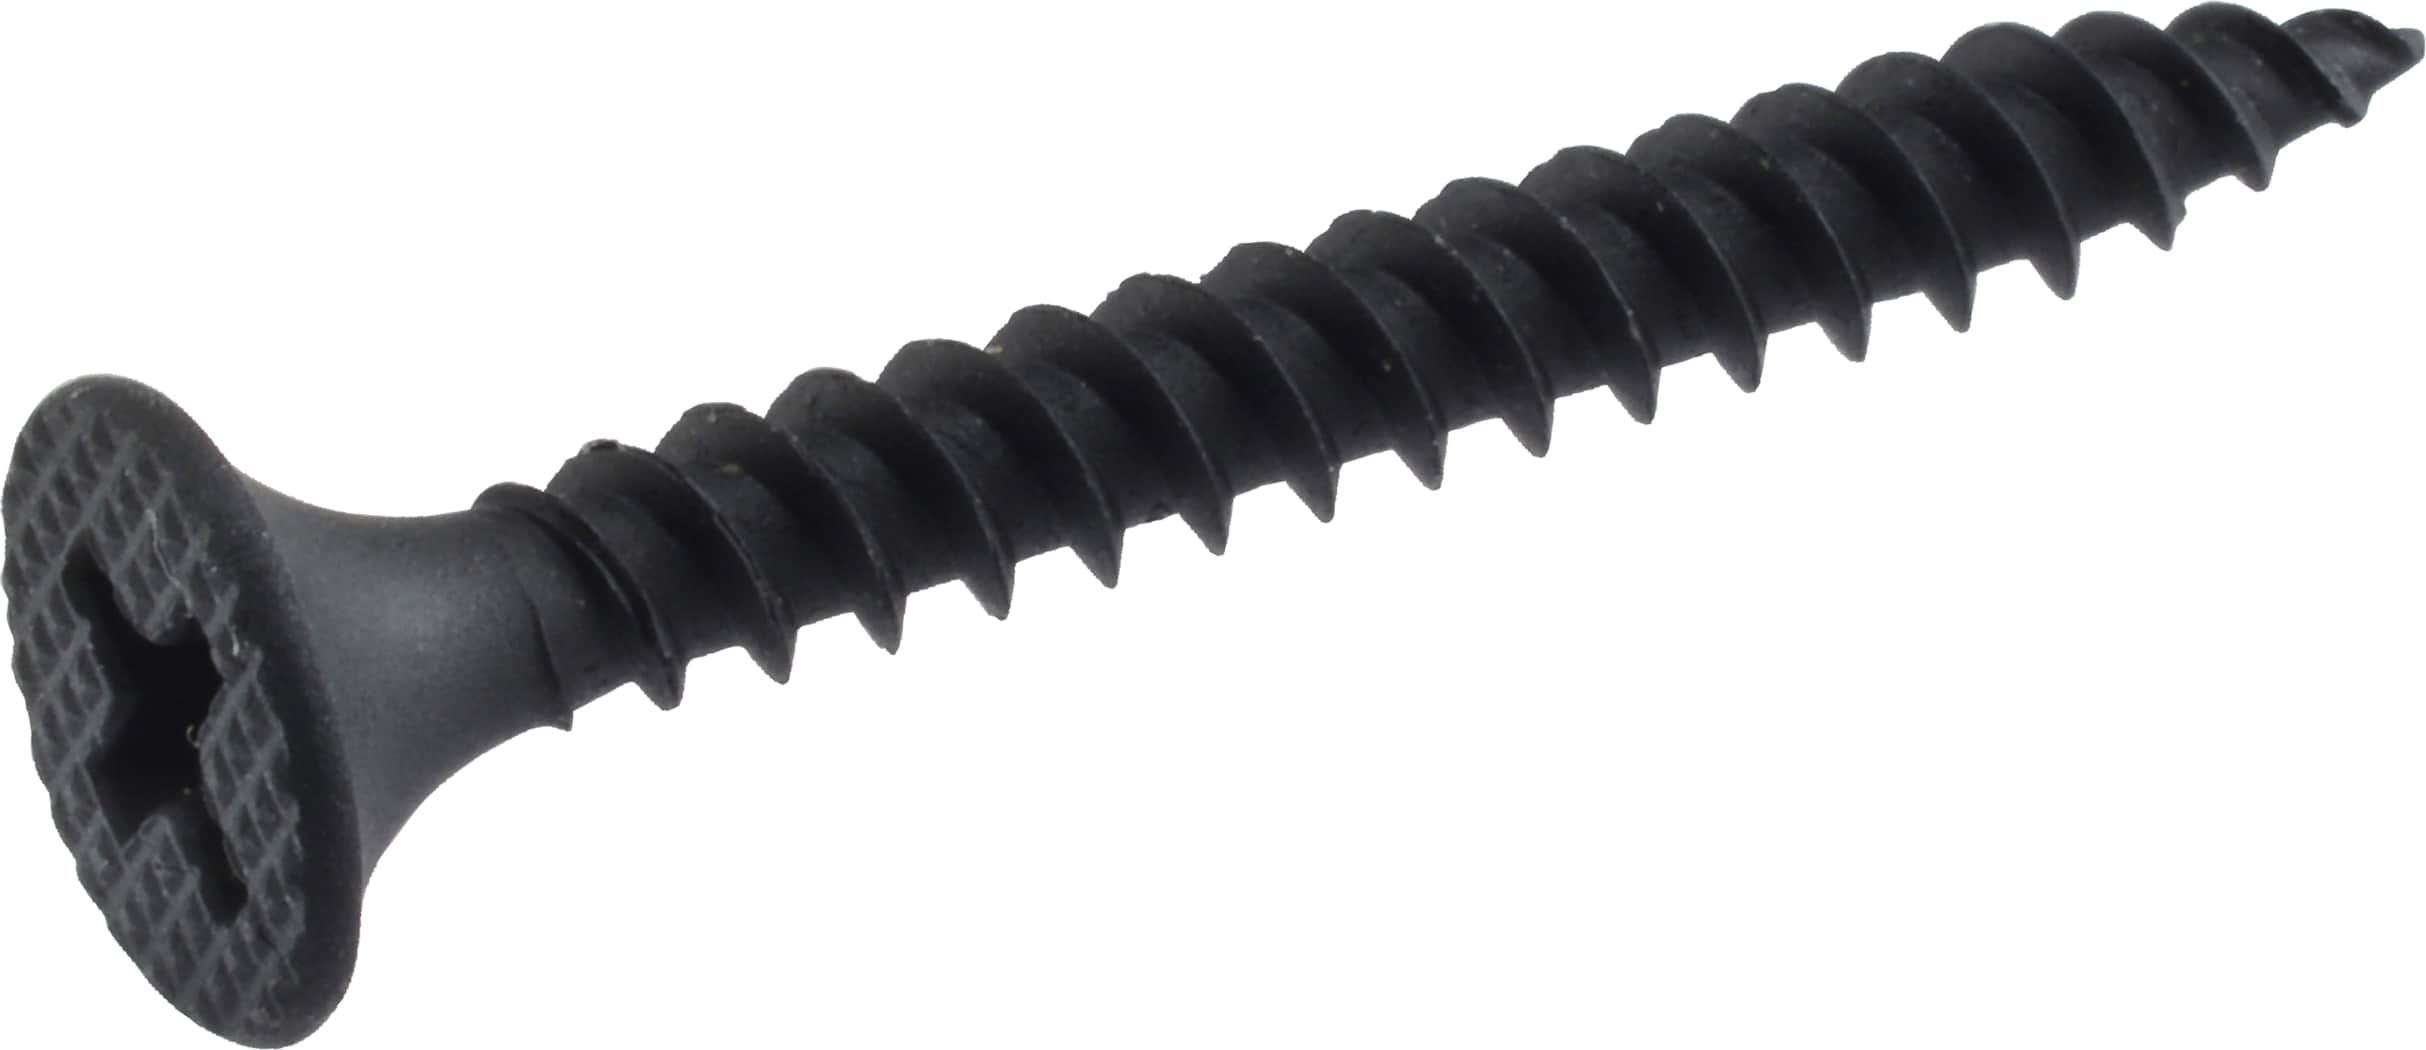 The Hillman Group 47100 6-Inch x 1-Inch Fine Thread Phillips Drive Drywall Screw 